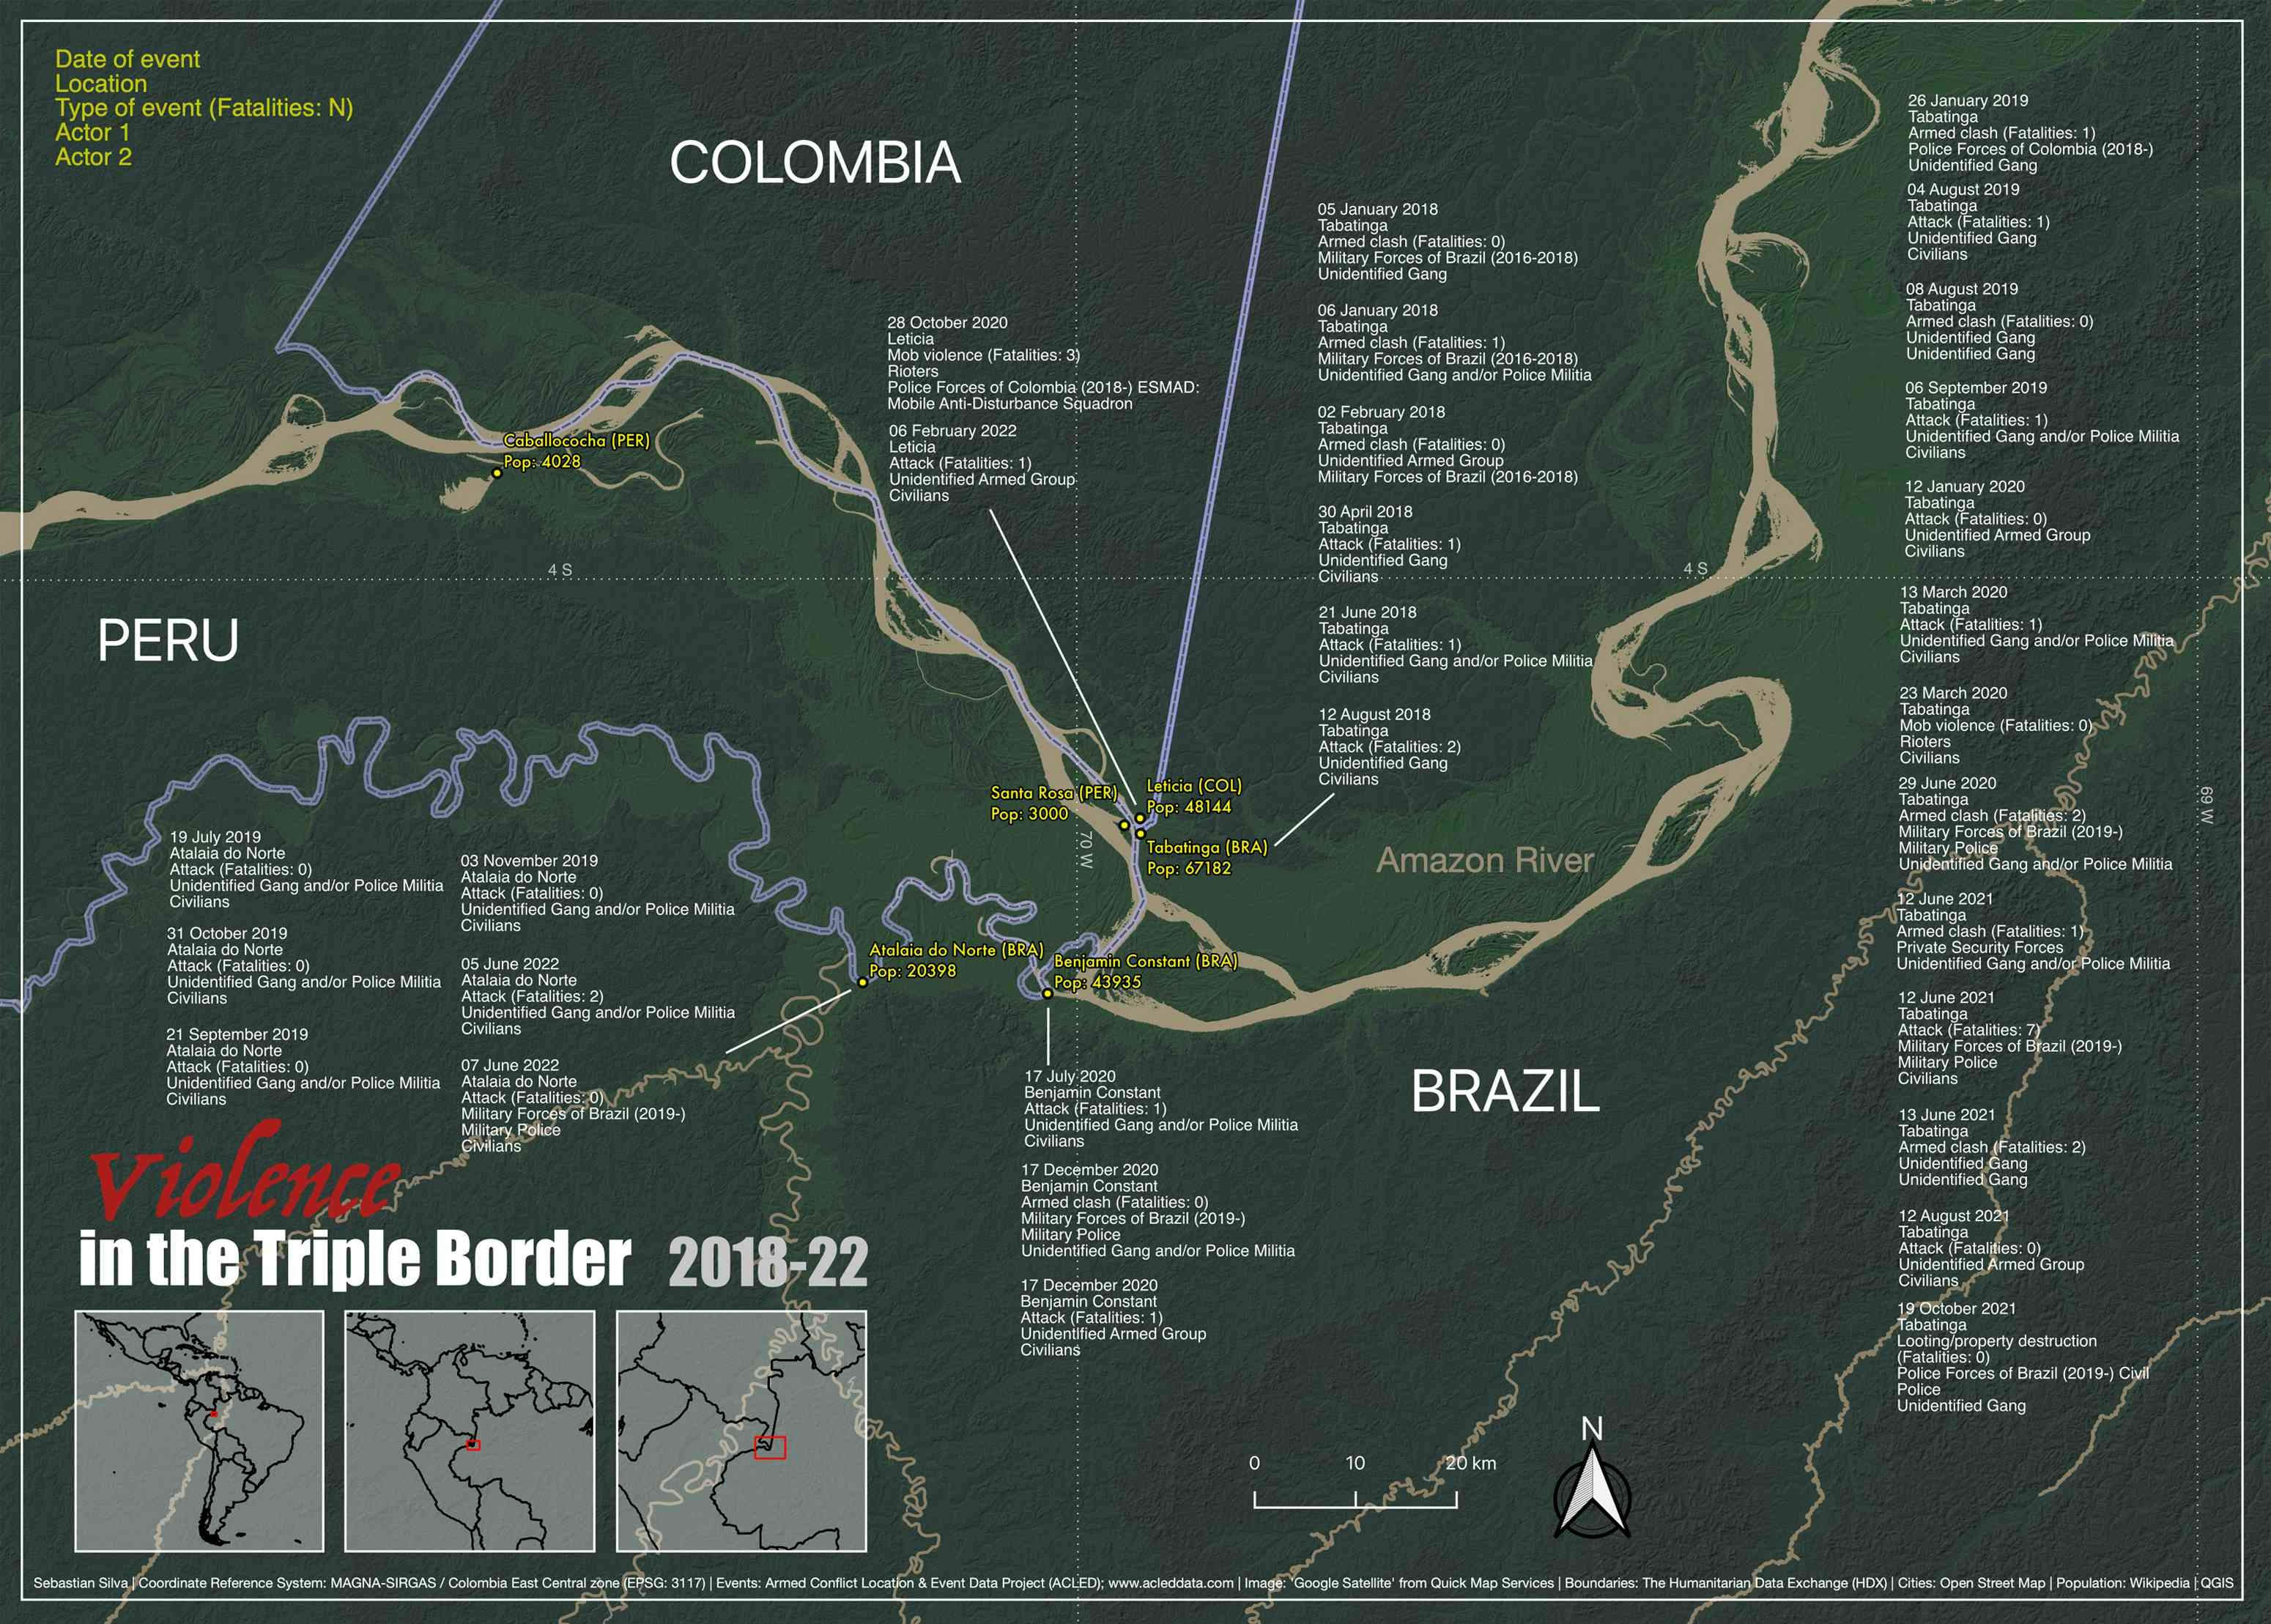 Violence in the Triple Border, 2018-2022